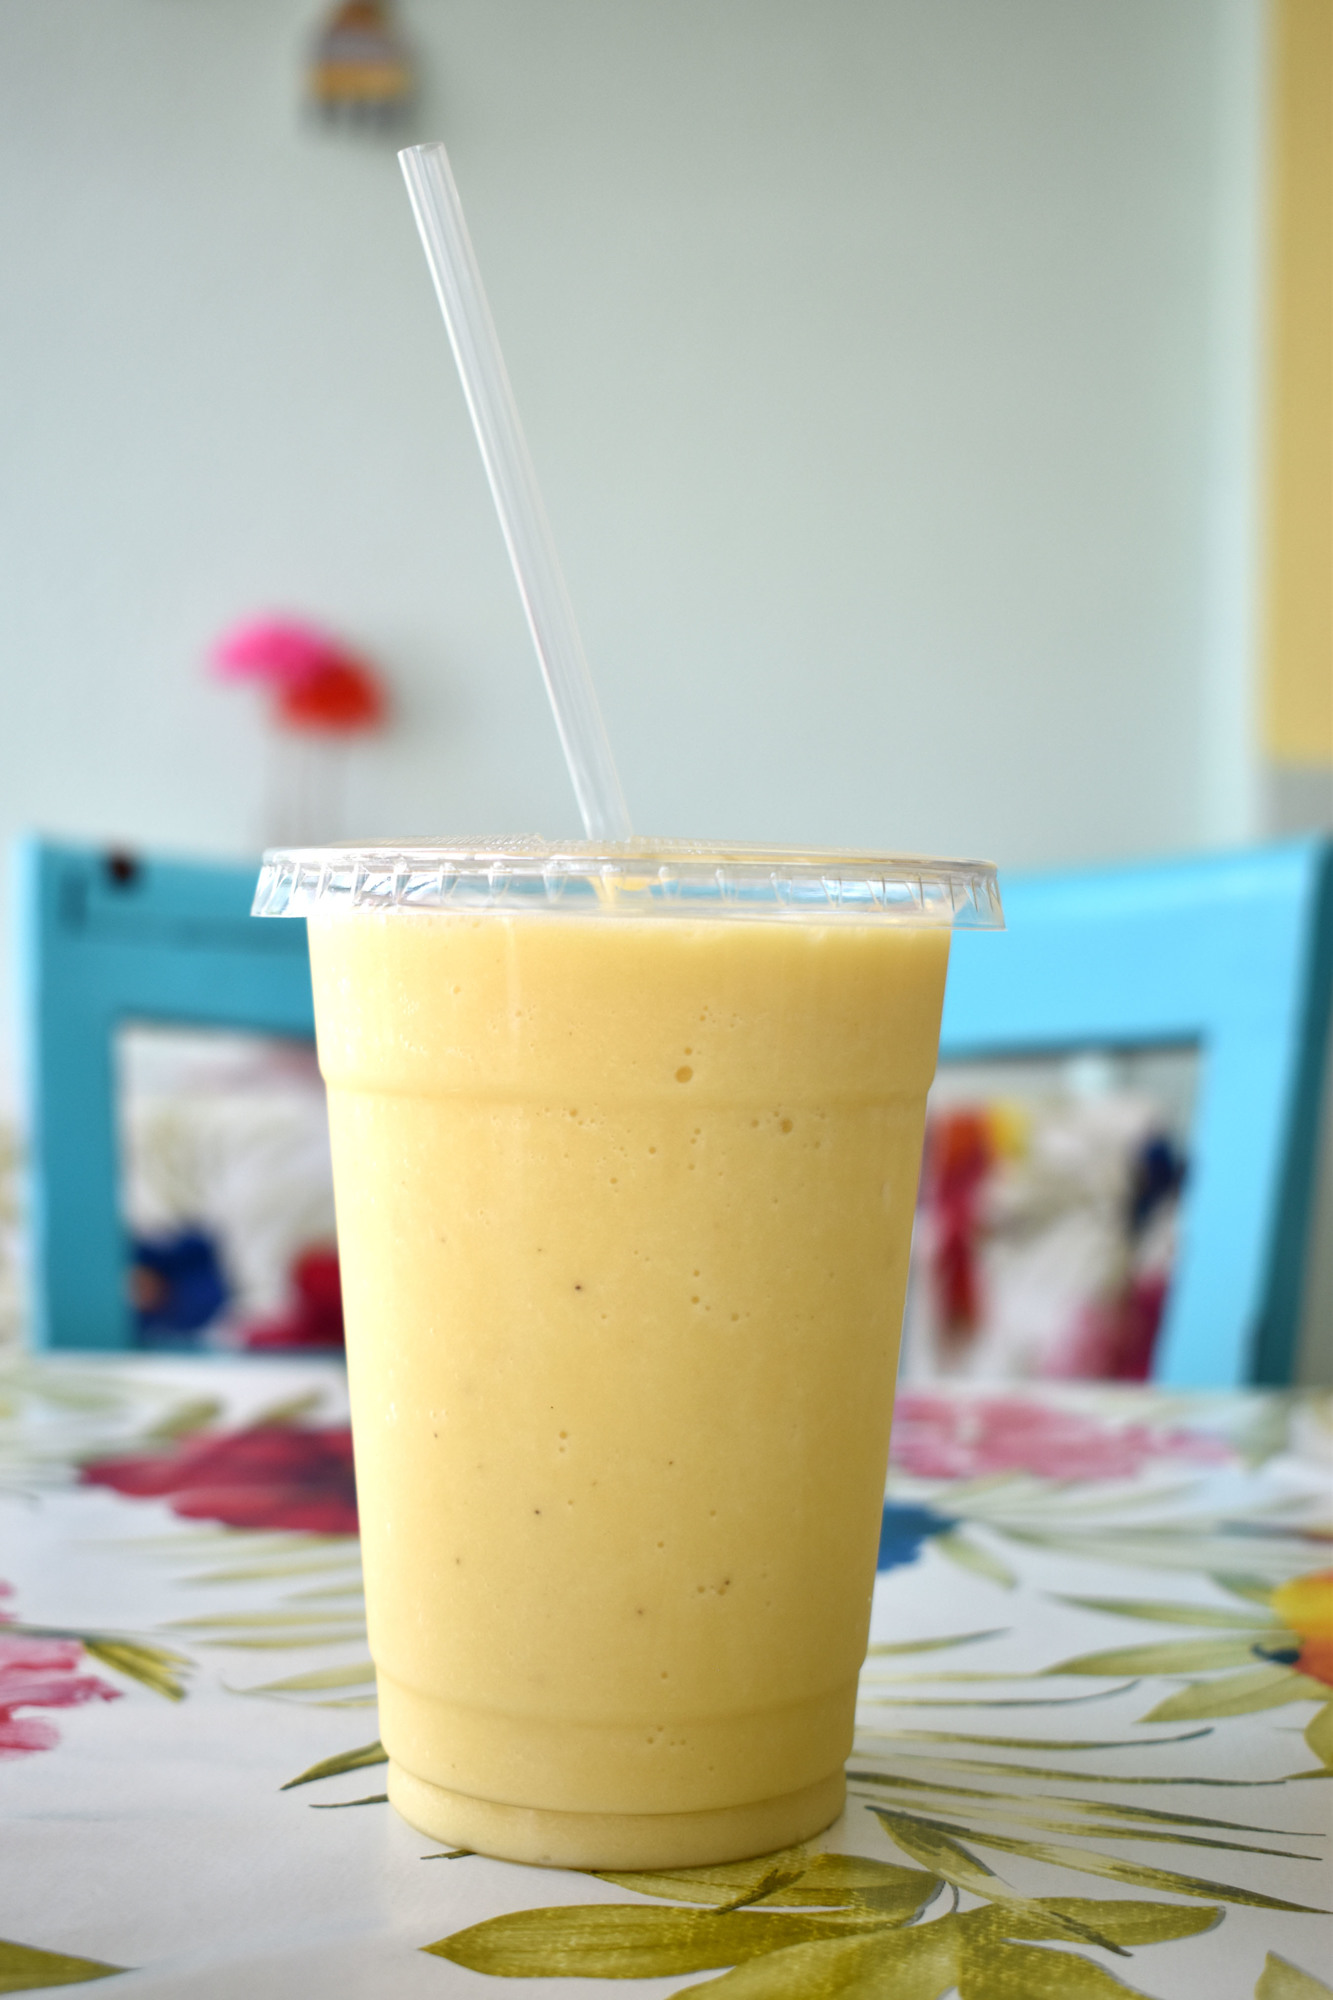 Simply Susanne's Cafe sells smoothies along with breakfast and lunch options.